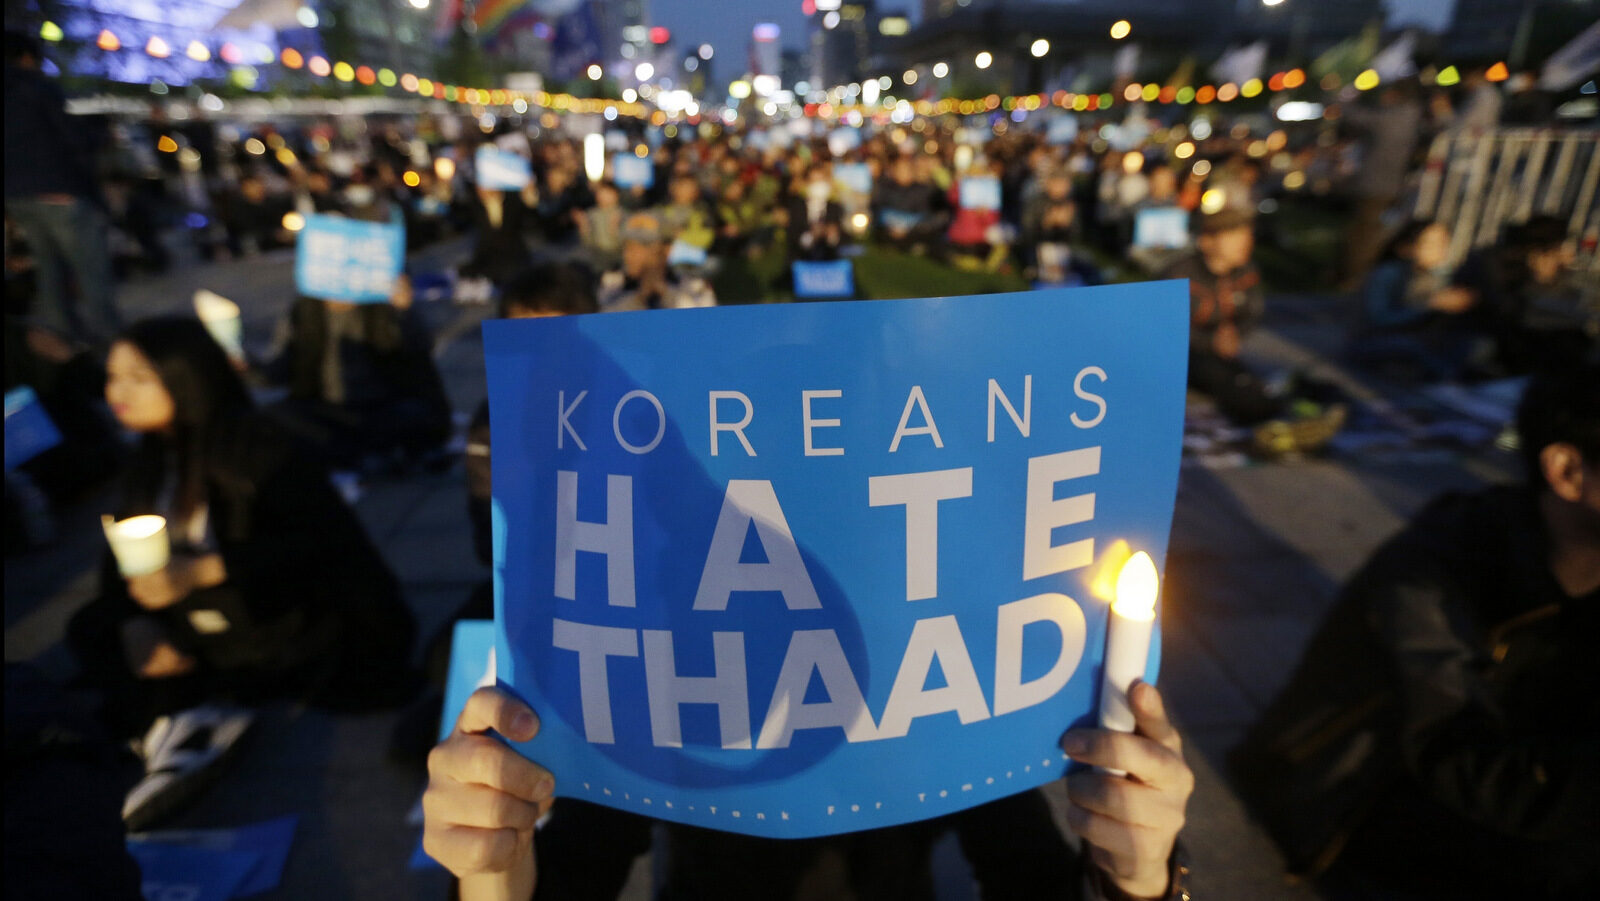 South Korean protesters stage a rally to oppose the plan to deploy the advanced U.S. missile defense system called Terminal High-Altitude Area Defense, or THAAD, near the U.S. Embassy in Seoul, South Korea, April 29, 2017 (AP/Ahn Young-joon)